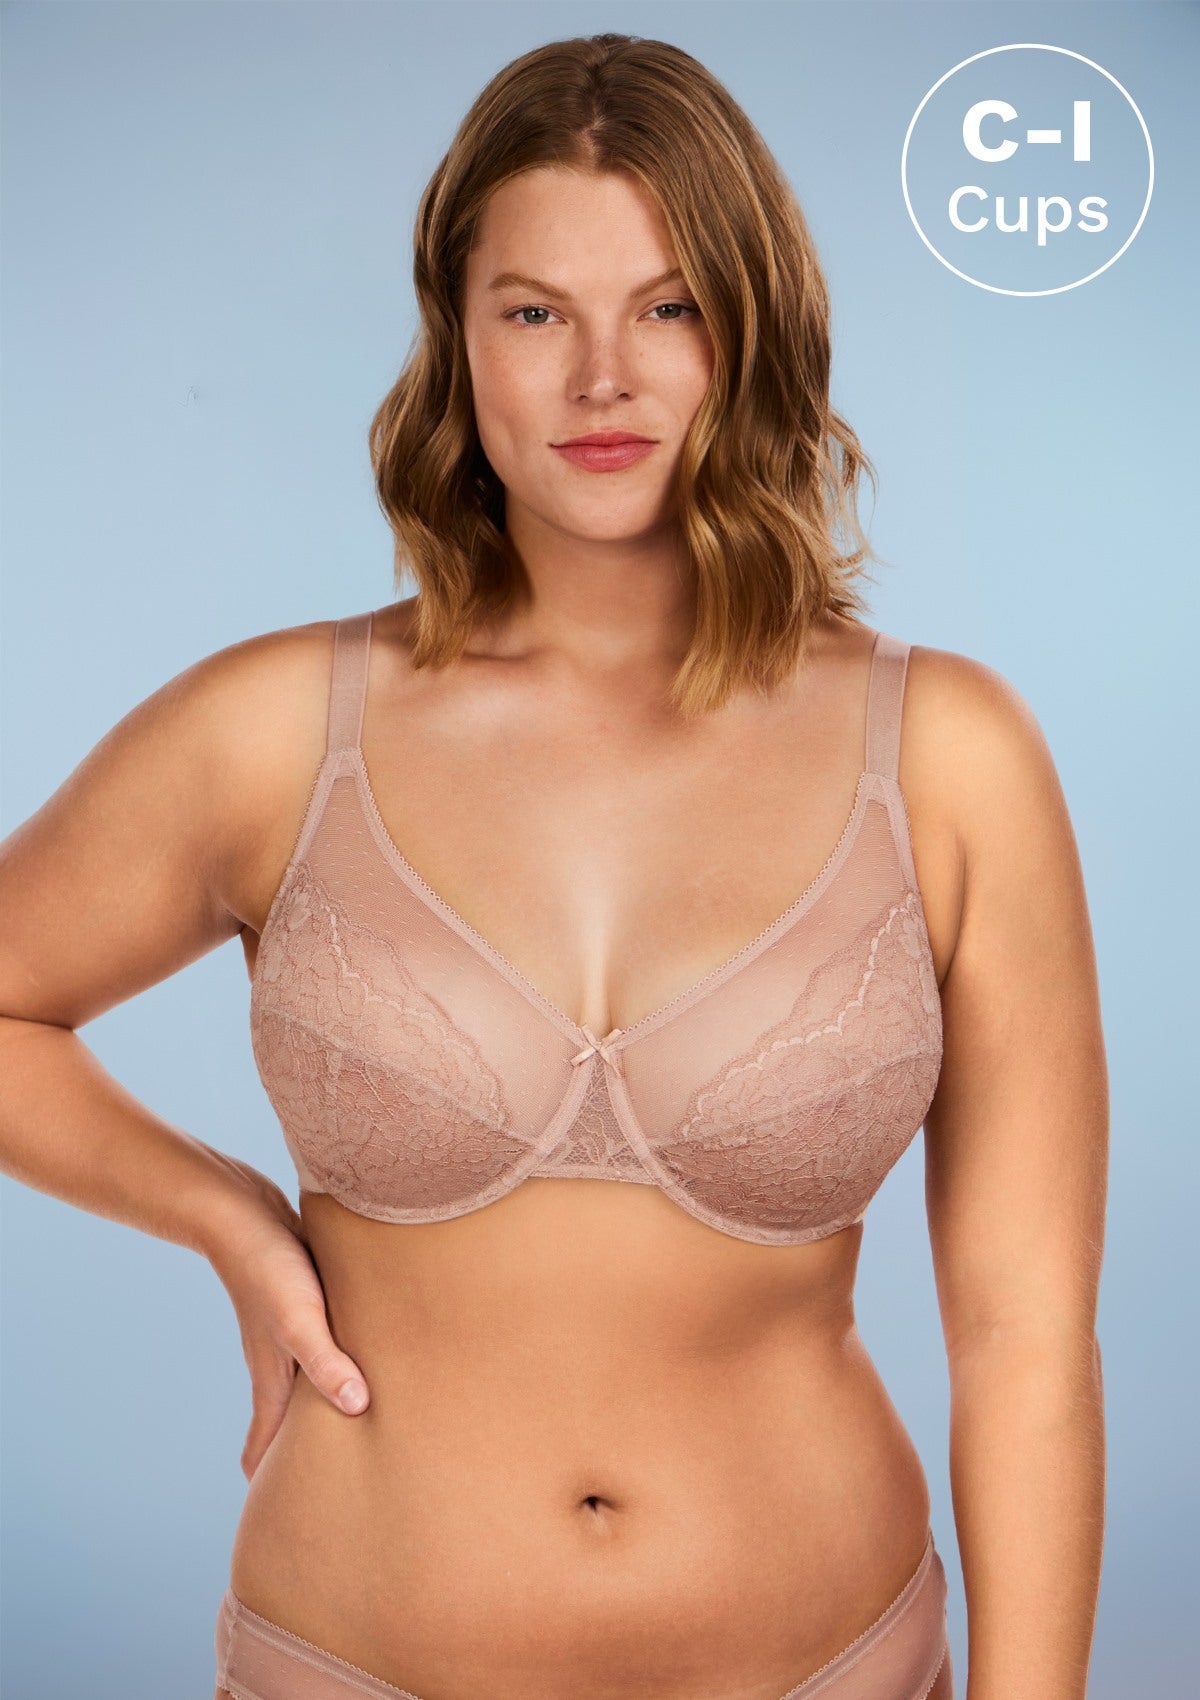 HSIA Enchante Full Cup Minimizing Bra: Supportive Unlined Lace Bra